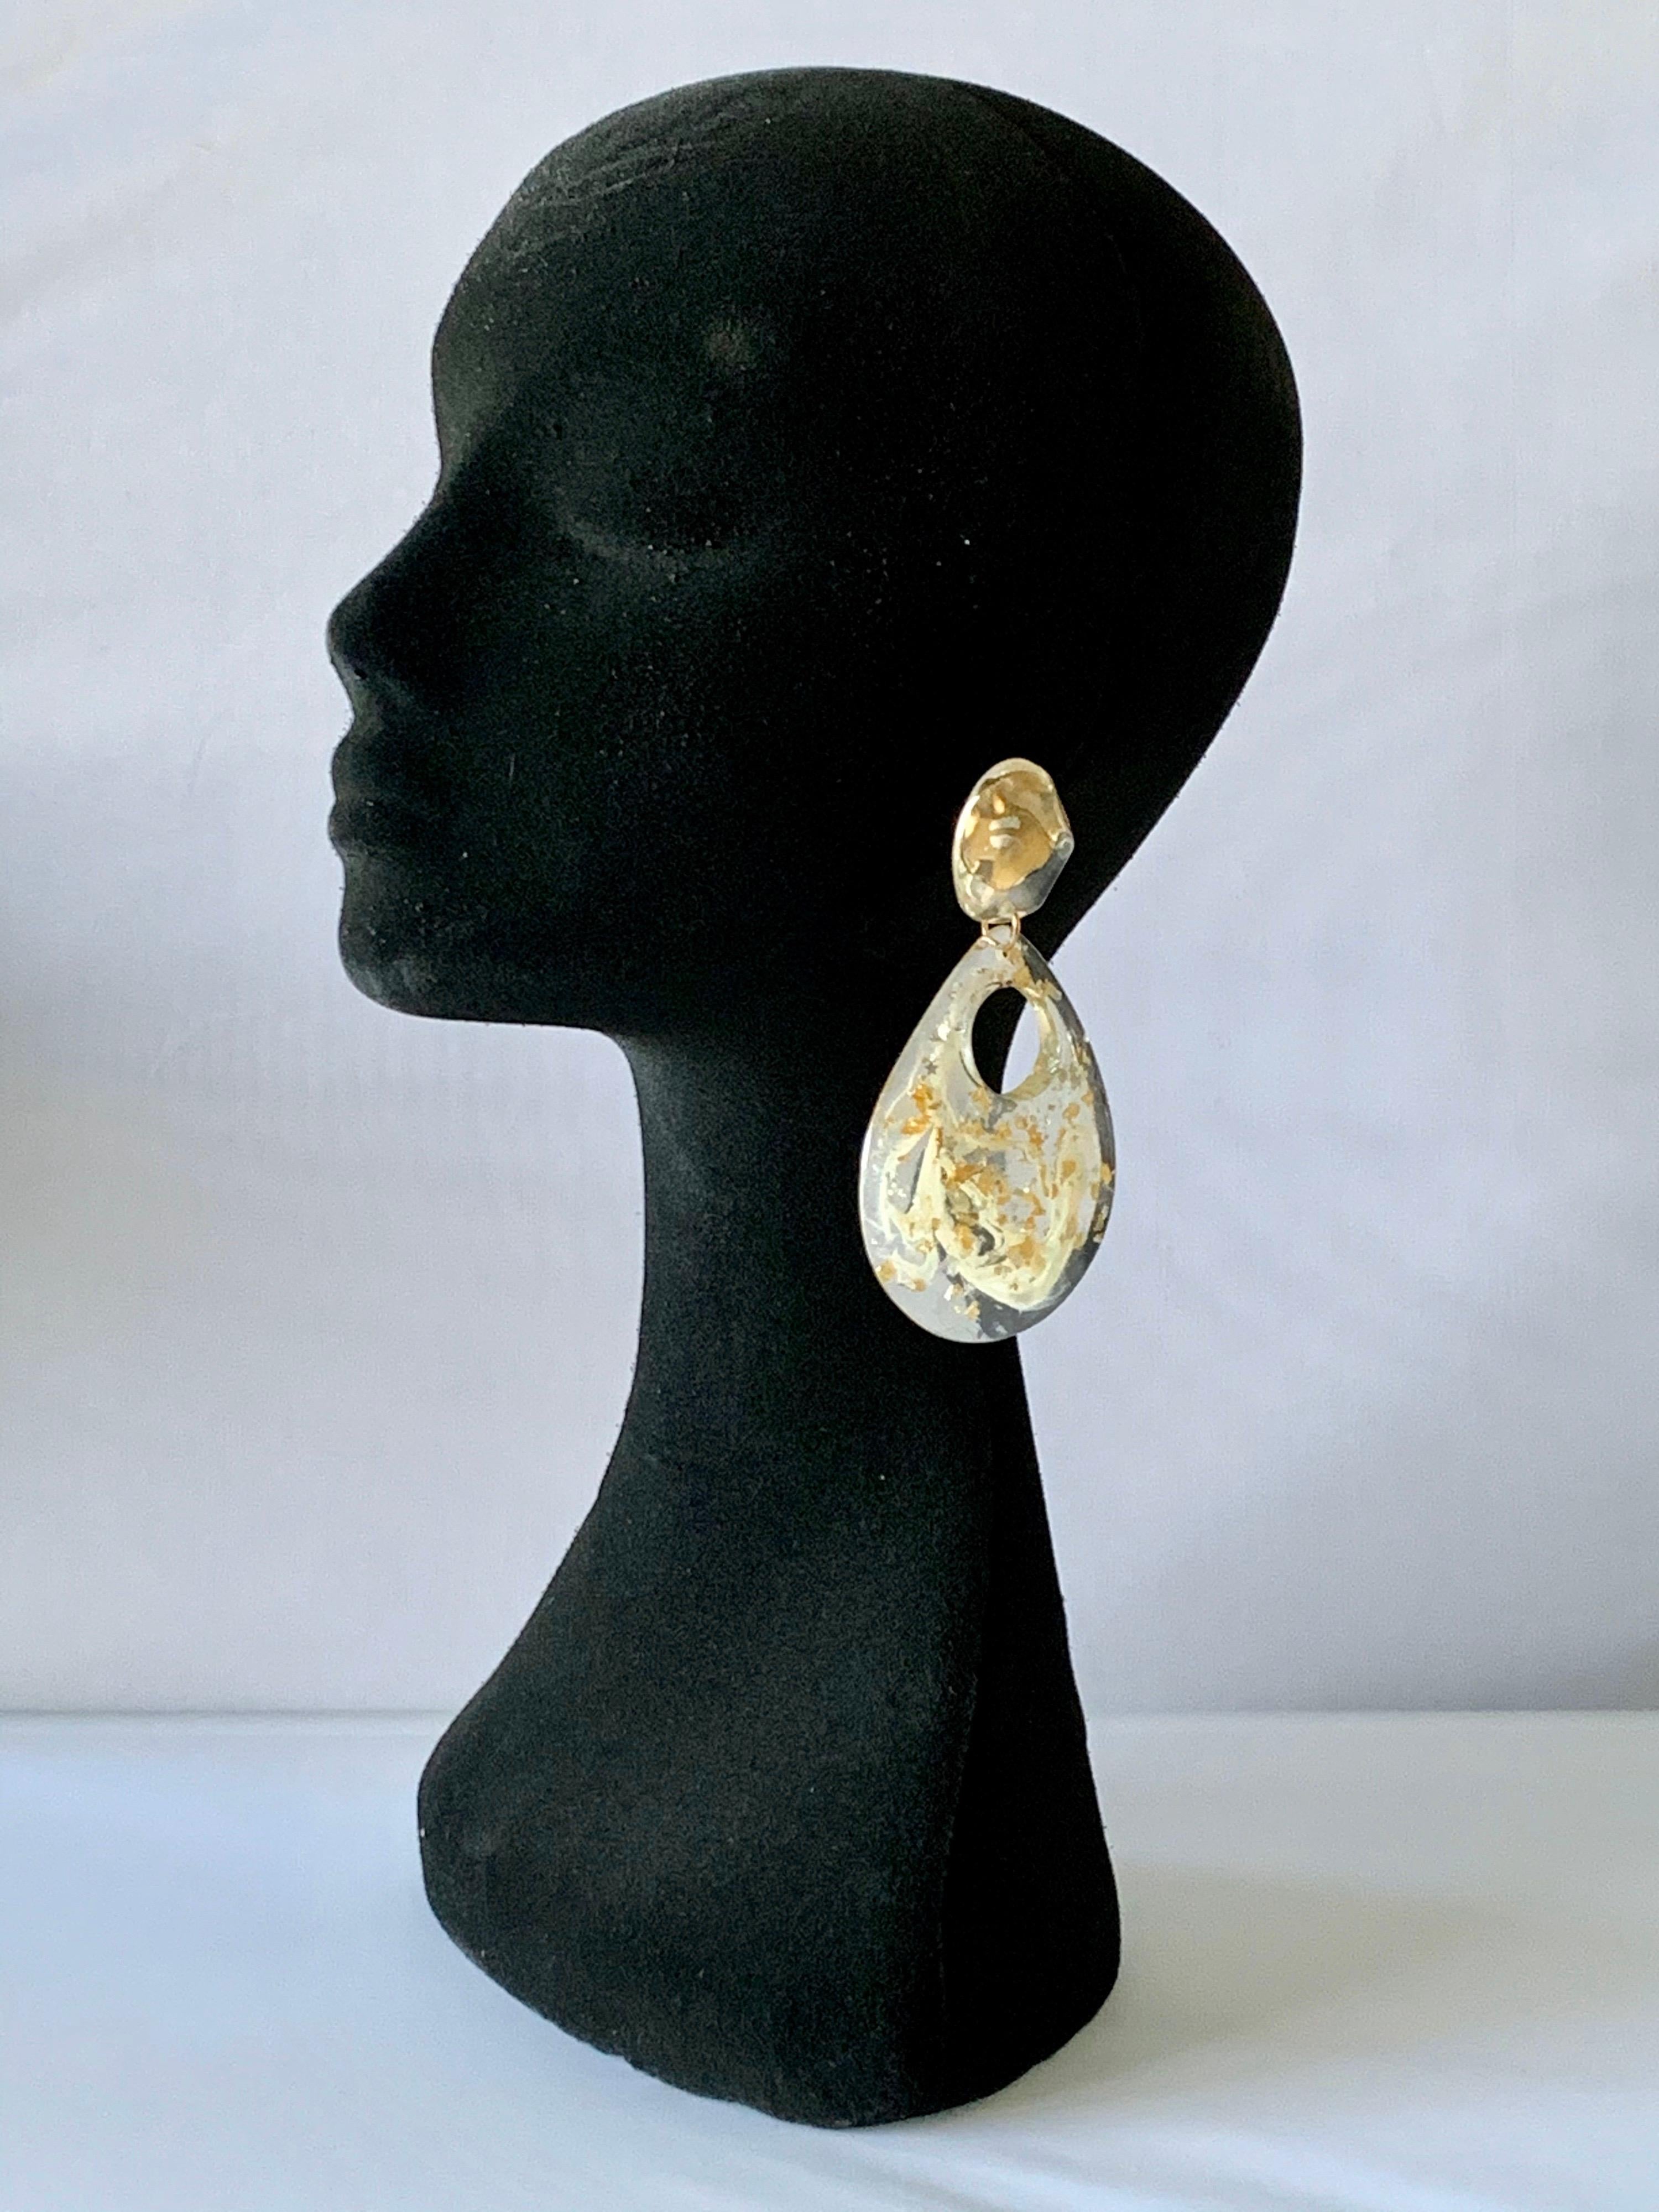 Vintage large clear acrylic gold flake, clip-on statement earrings circa 1980's/1990's. The earrings feature an edgy contemporary design, unsigned. 